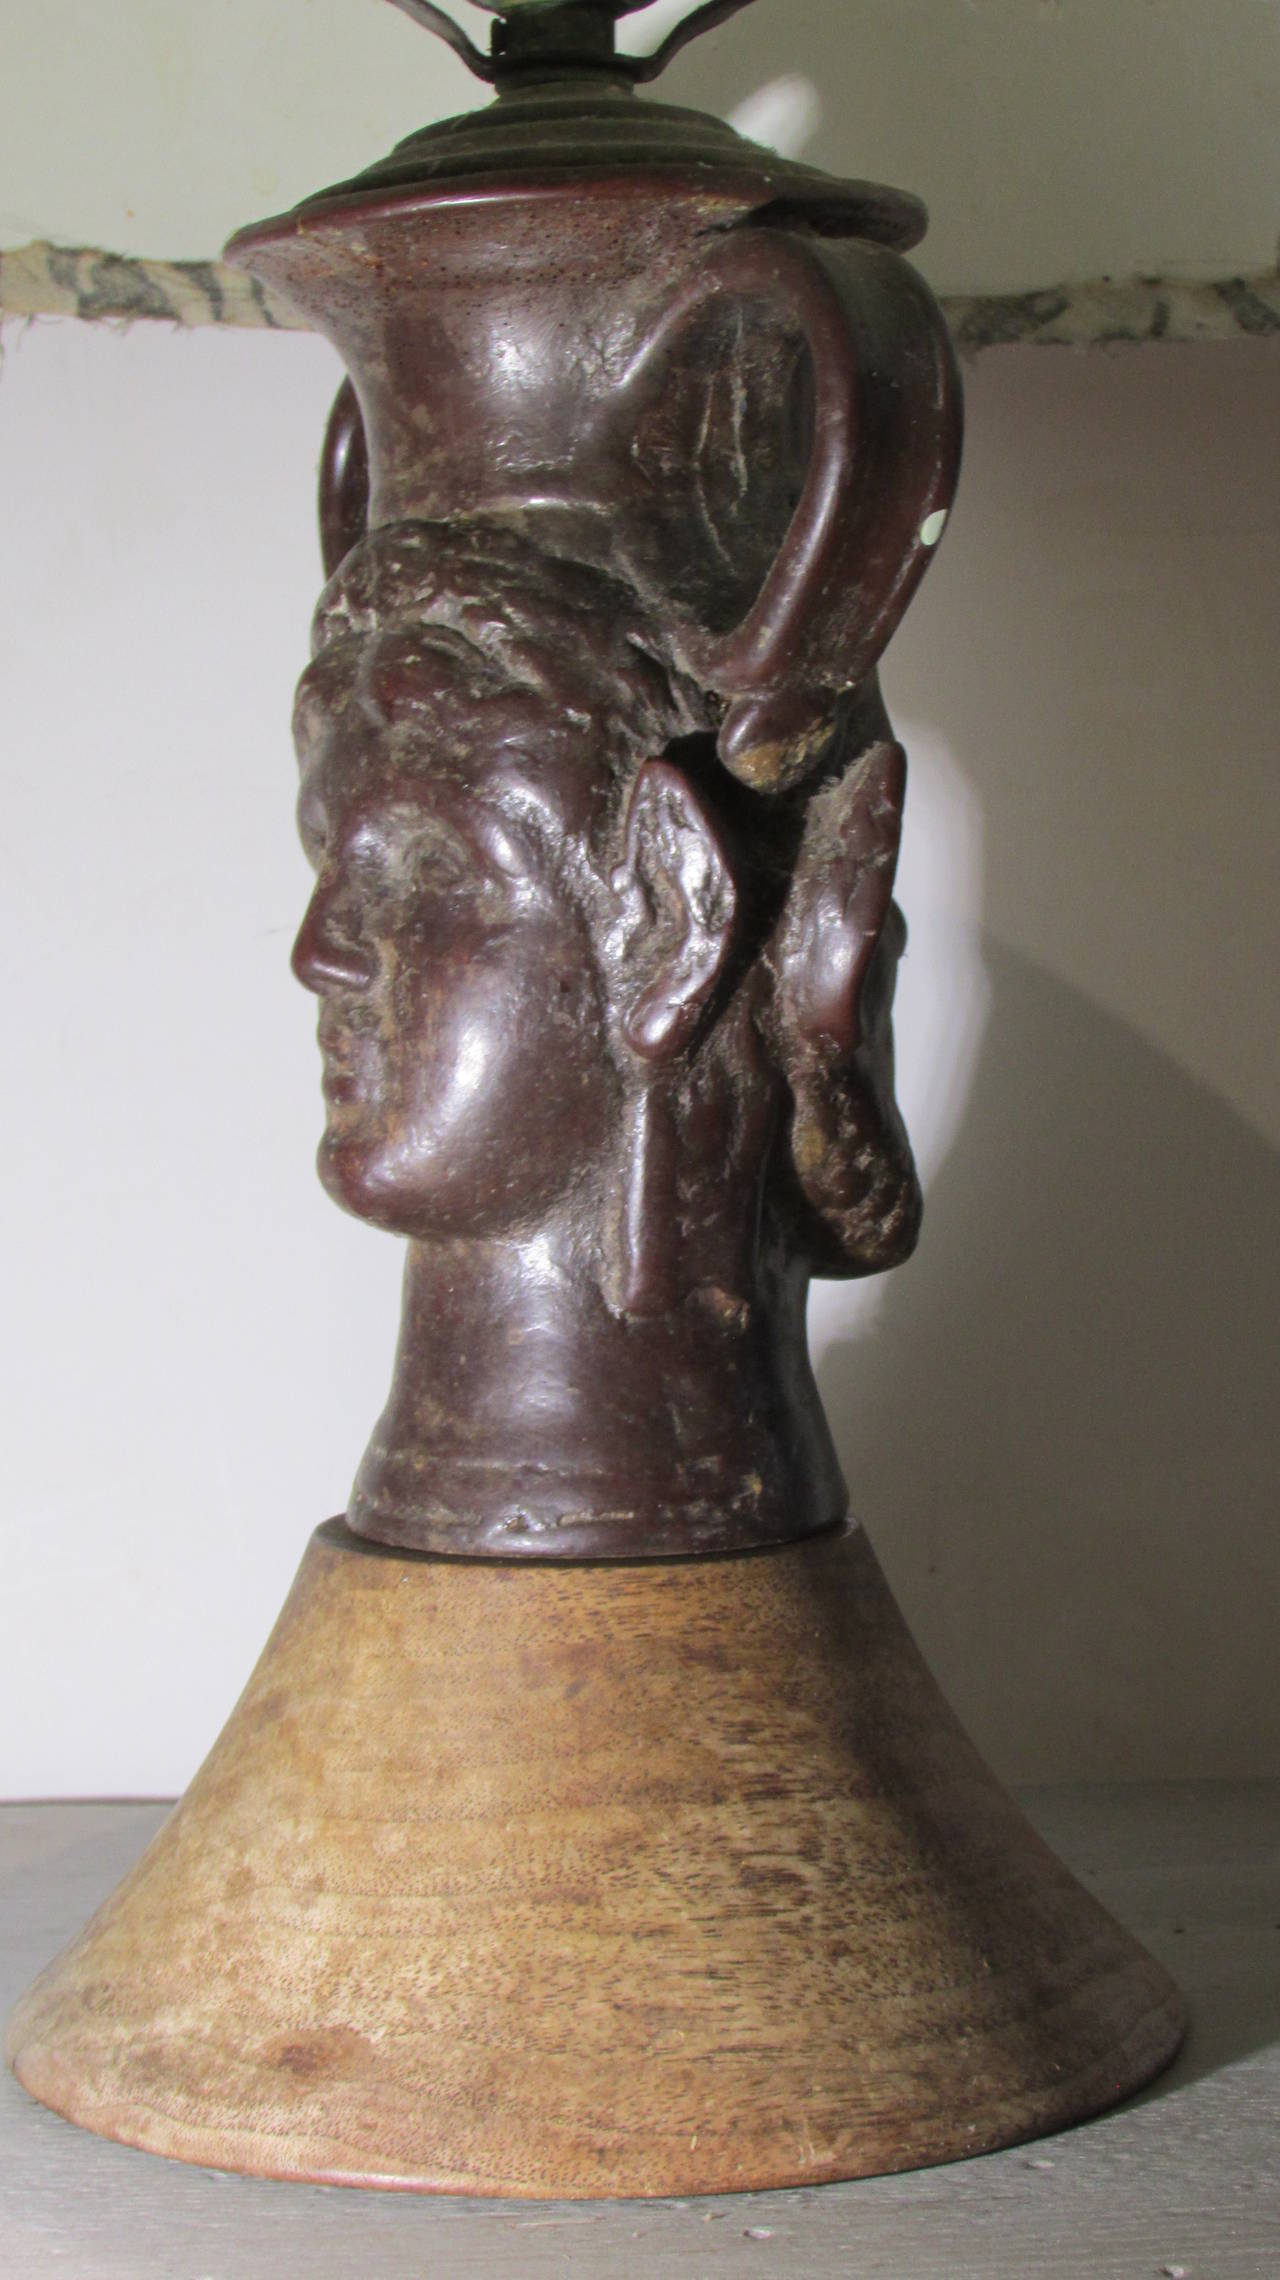 An unusual 1940s composition and wood table lamp in the surrealistic style of Jean Cocteau with a classical face on one side and a devilish satyr face on the other side. The shade covered in vintage Fortuny fabric.